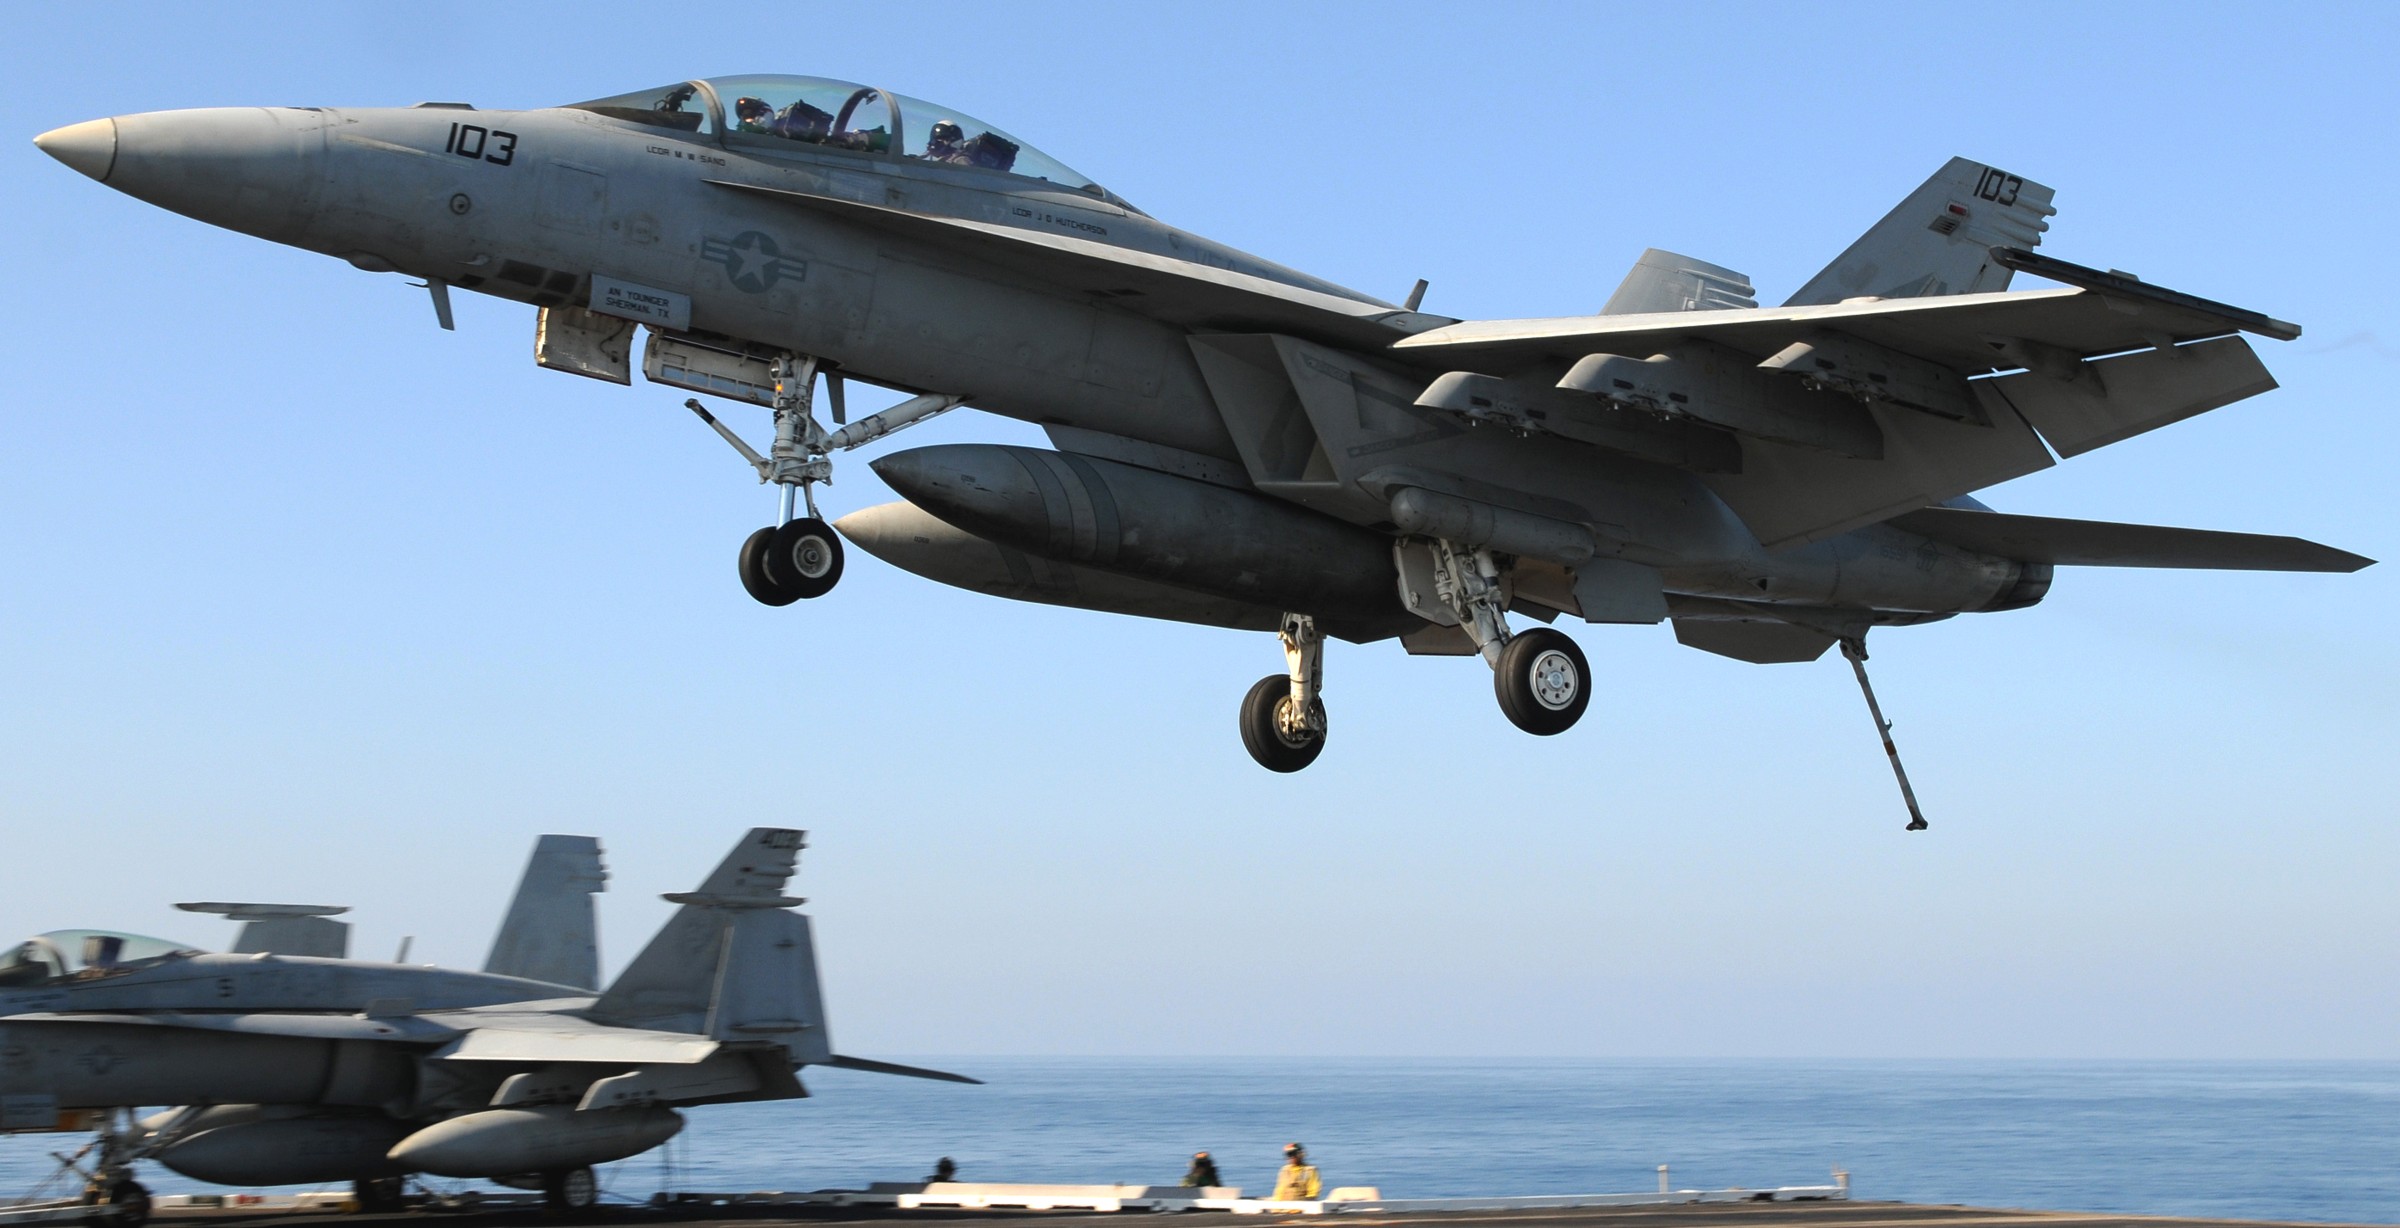 vfa-2 bounty hunters strike fighter squadron us navy f/a-18f super hornet carrier air wing cvw-2 uss abraham lincoln cvn-72 40